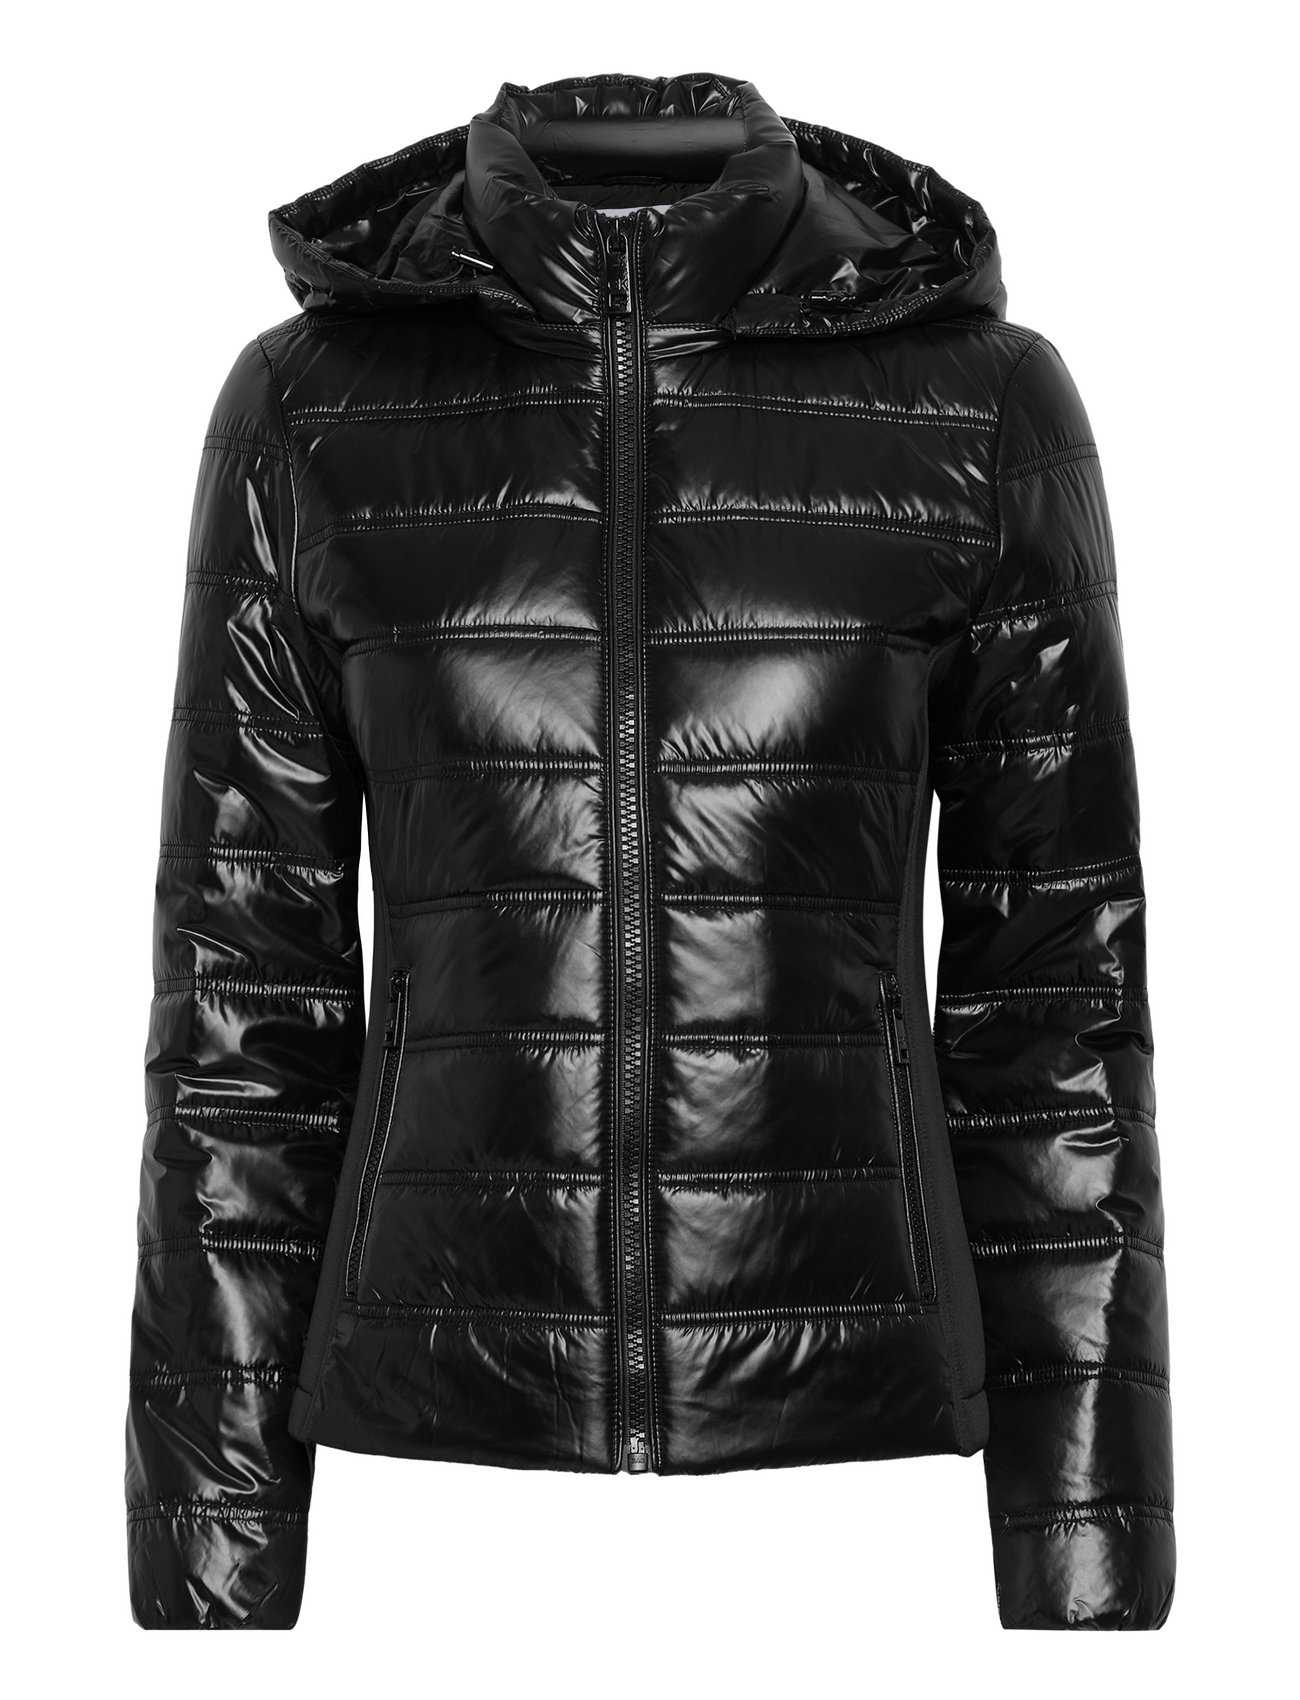 Calvin Klein jackets - Klein Waisted padded and at Boozt.com. online Nylon Padded Calvin Buy Lw €. Fast 114.95 returns delivery from Down- easy Jacket 